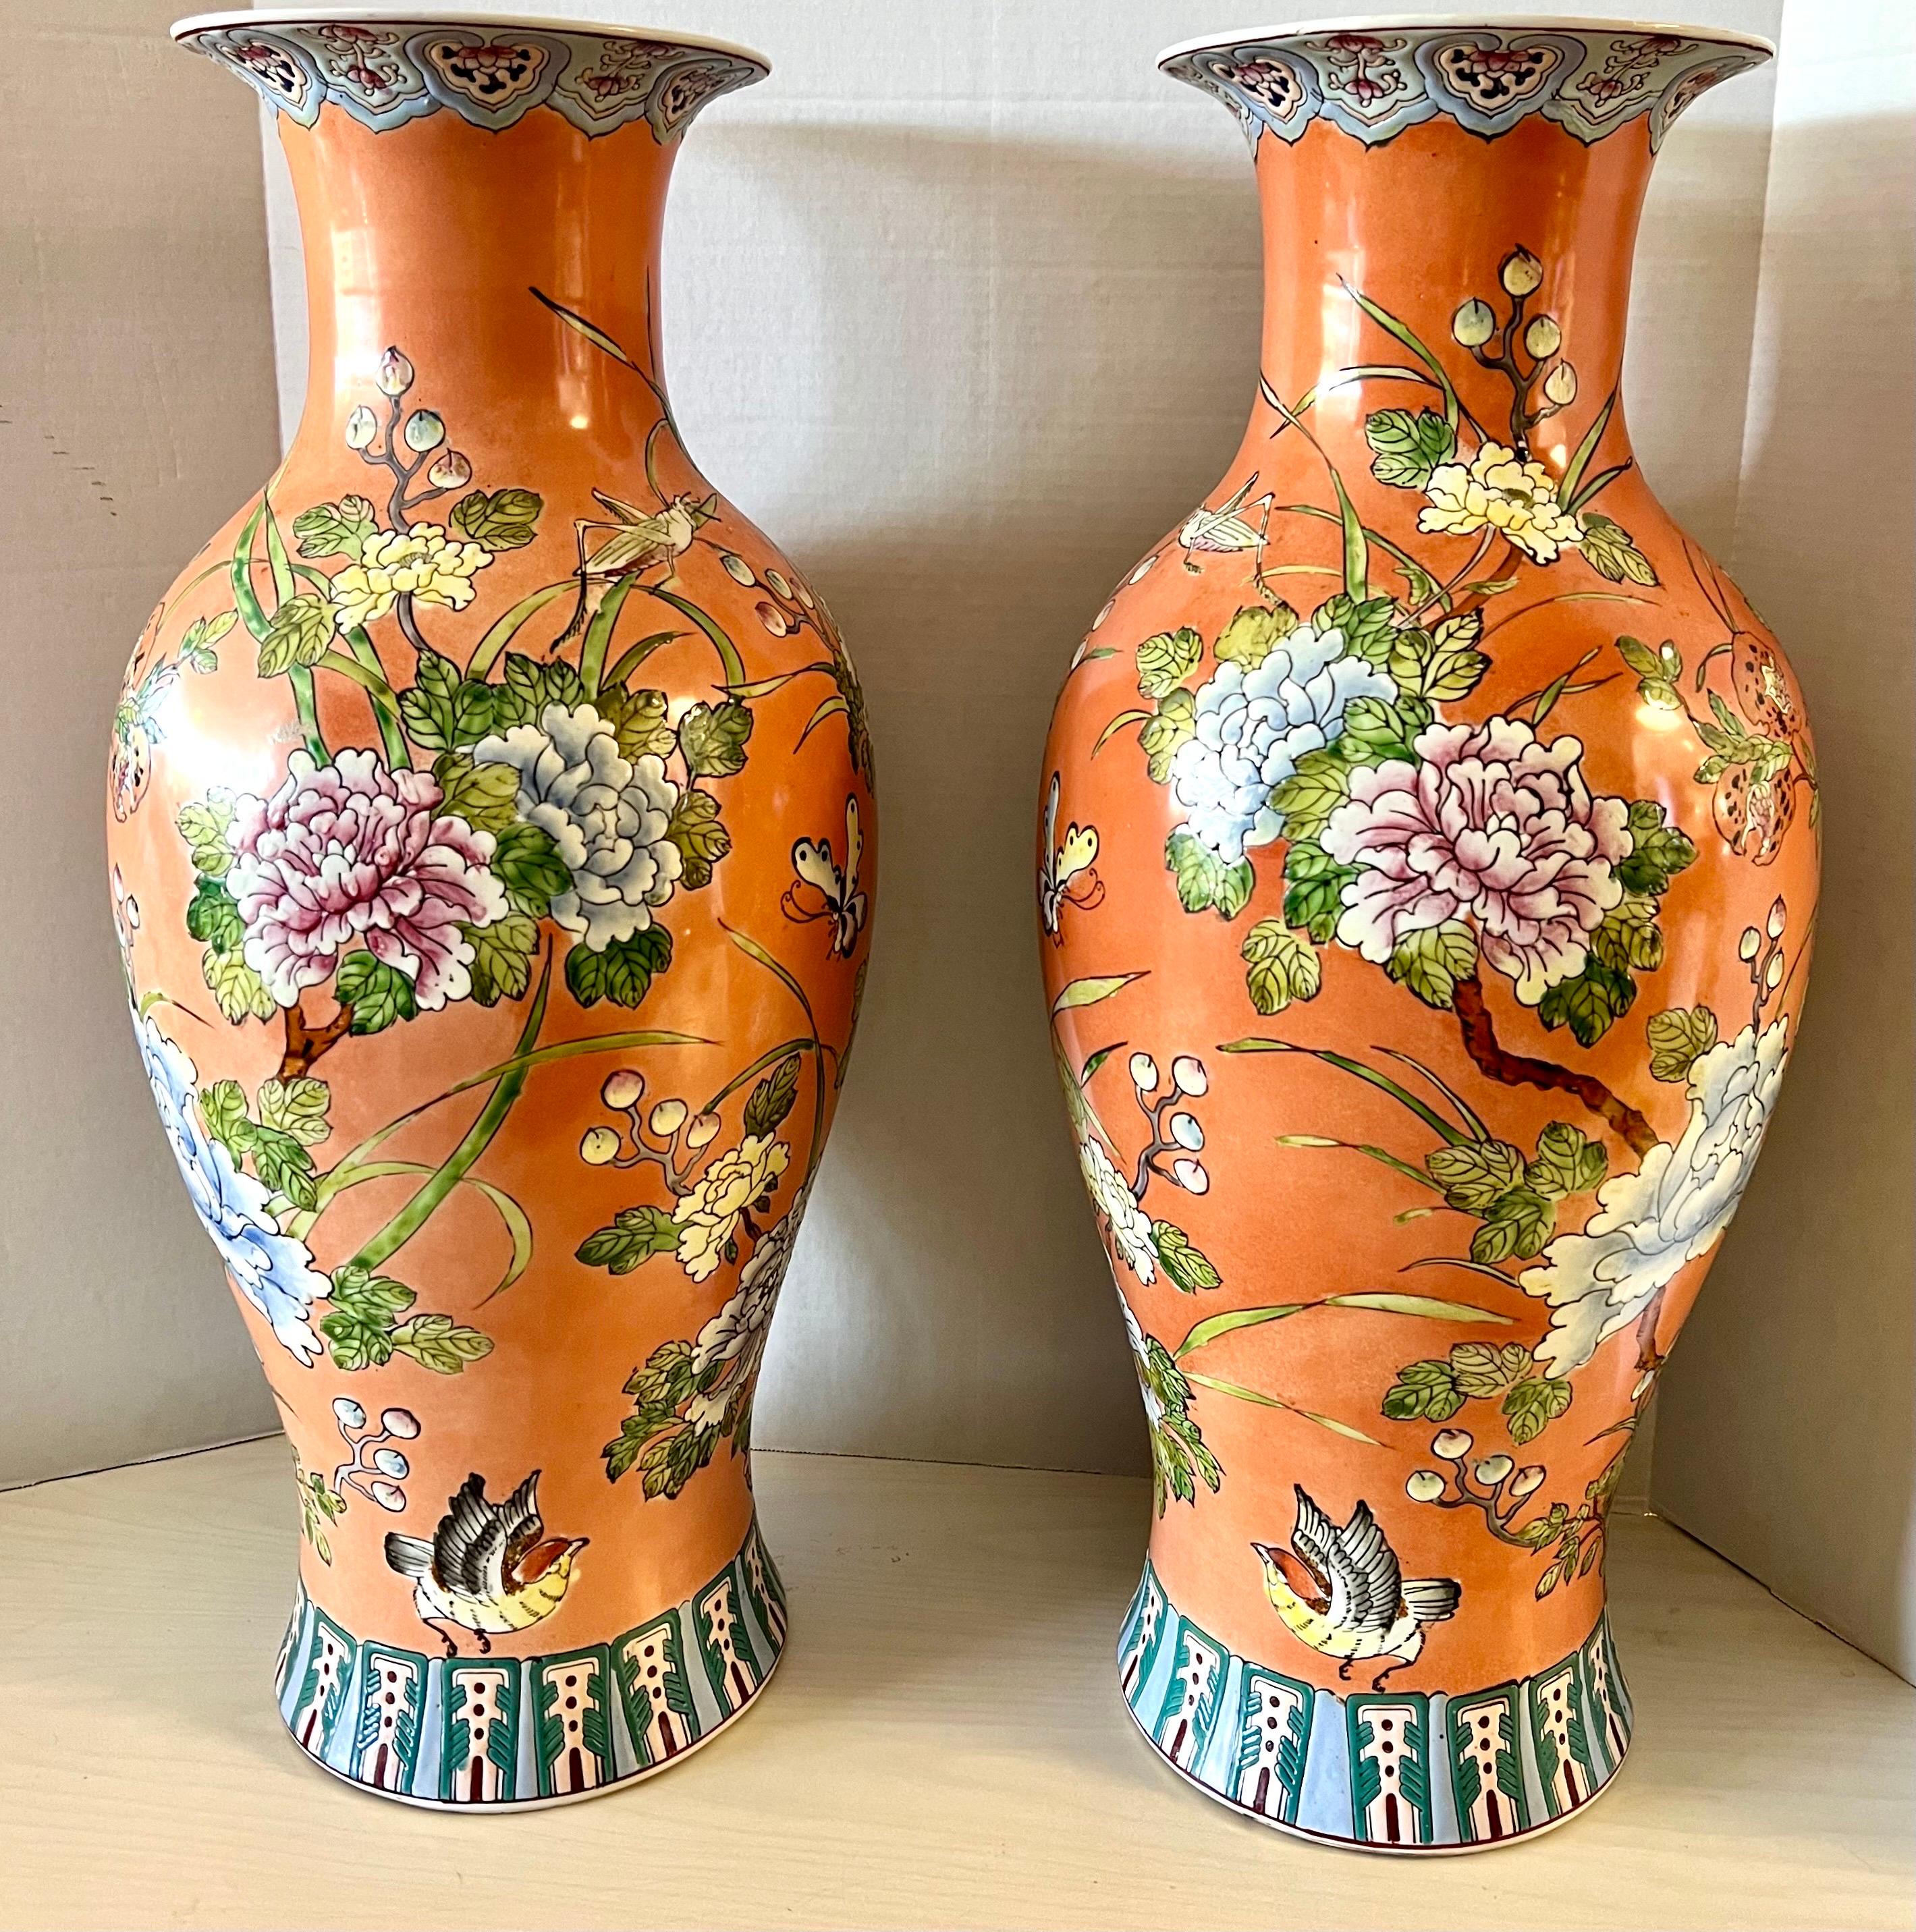 Very tall Chinese porcelain baluster form vases hand painted in the famille rose pattern on an orange ground with birds in flight and grasshoppers over blossoming chrysanthemum, pomegranates and other flaura.